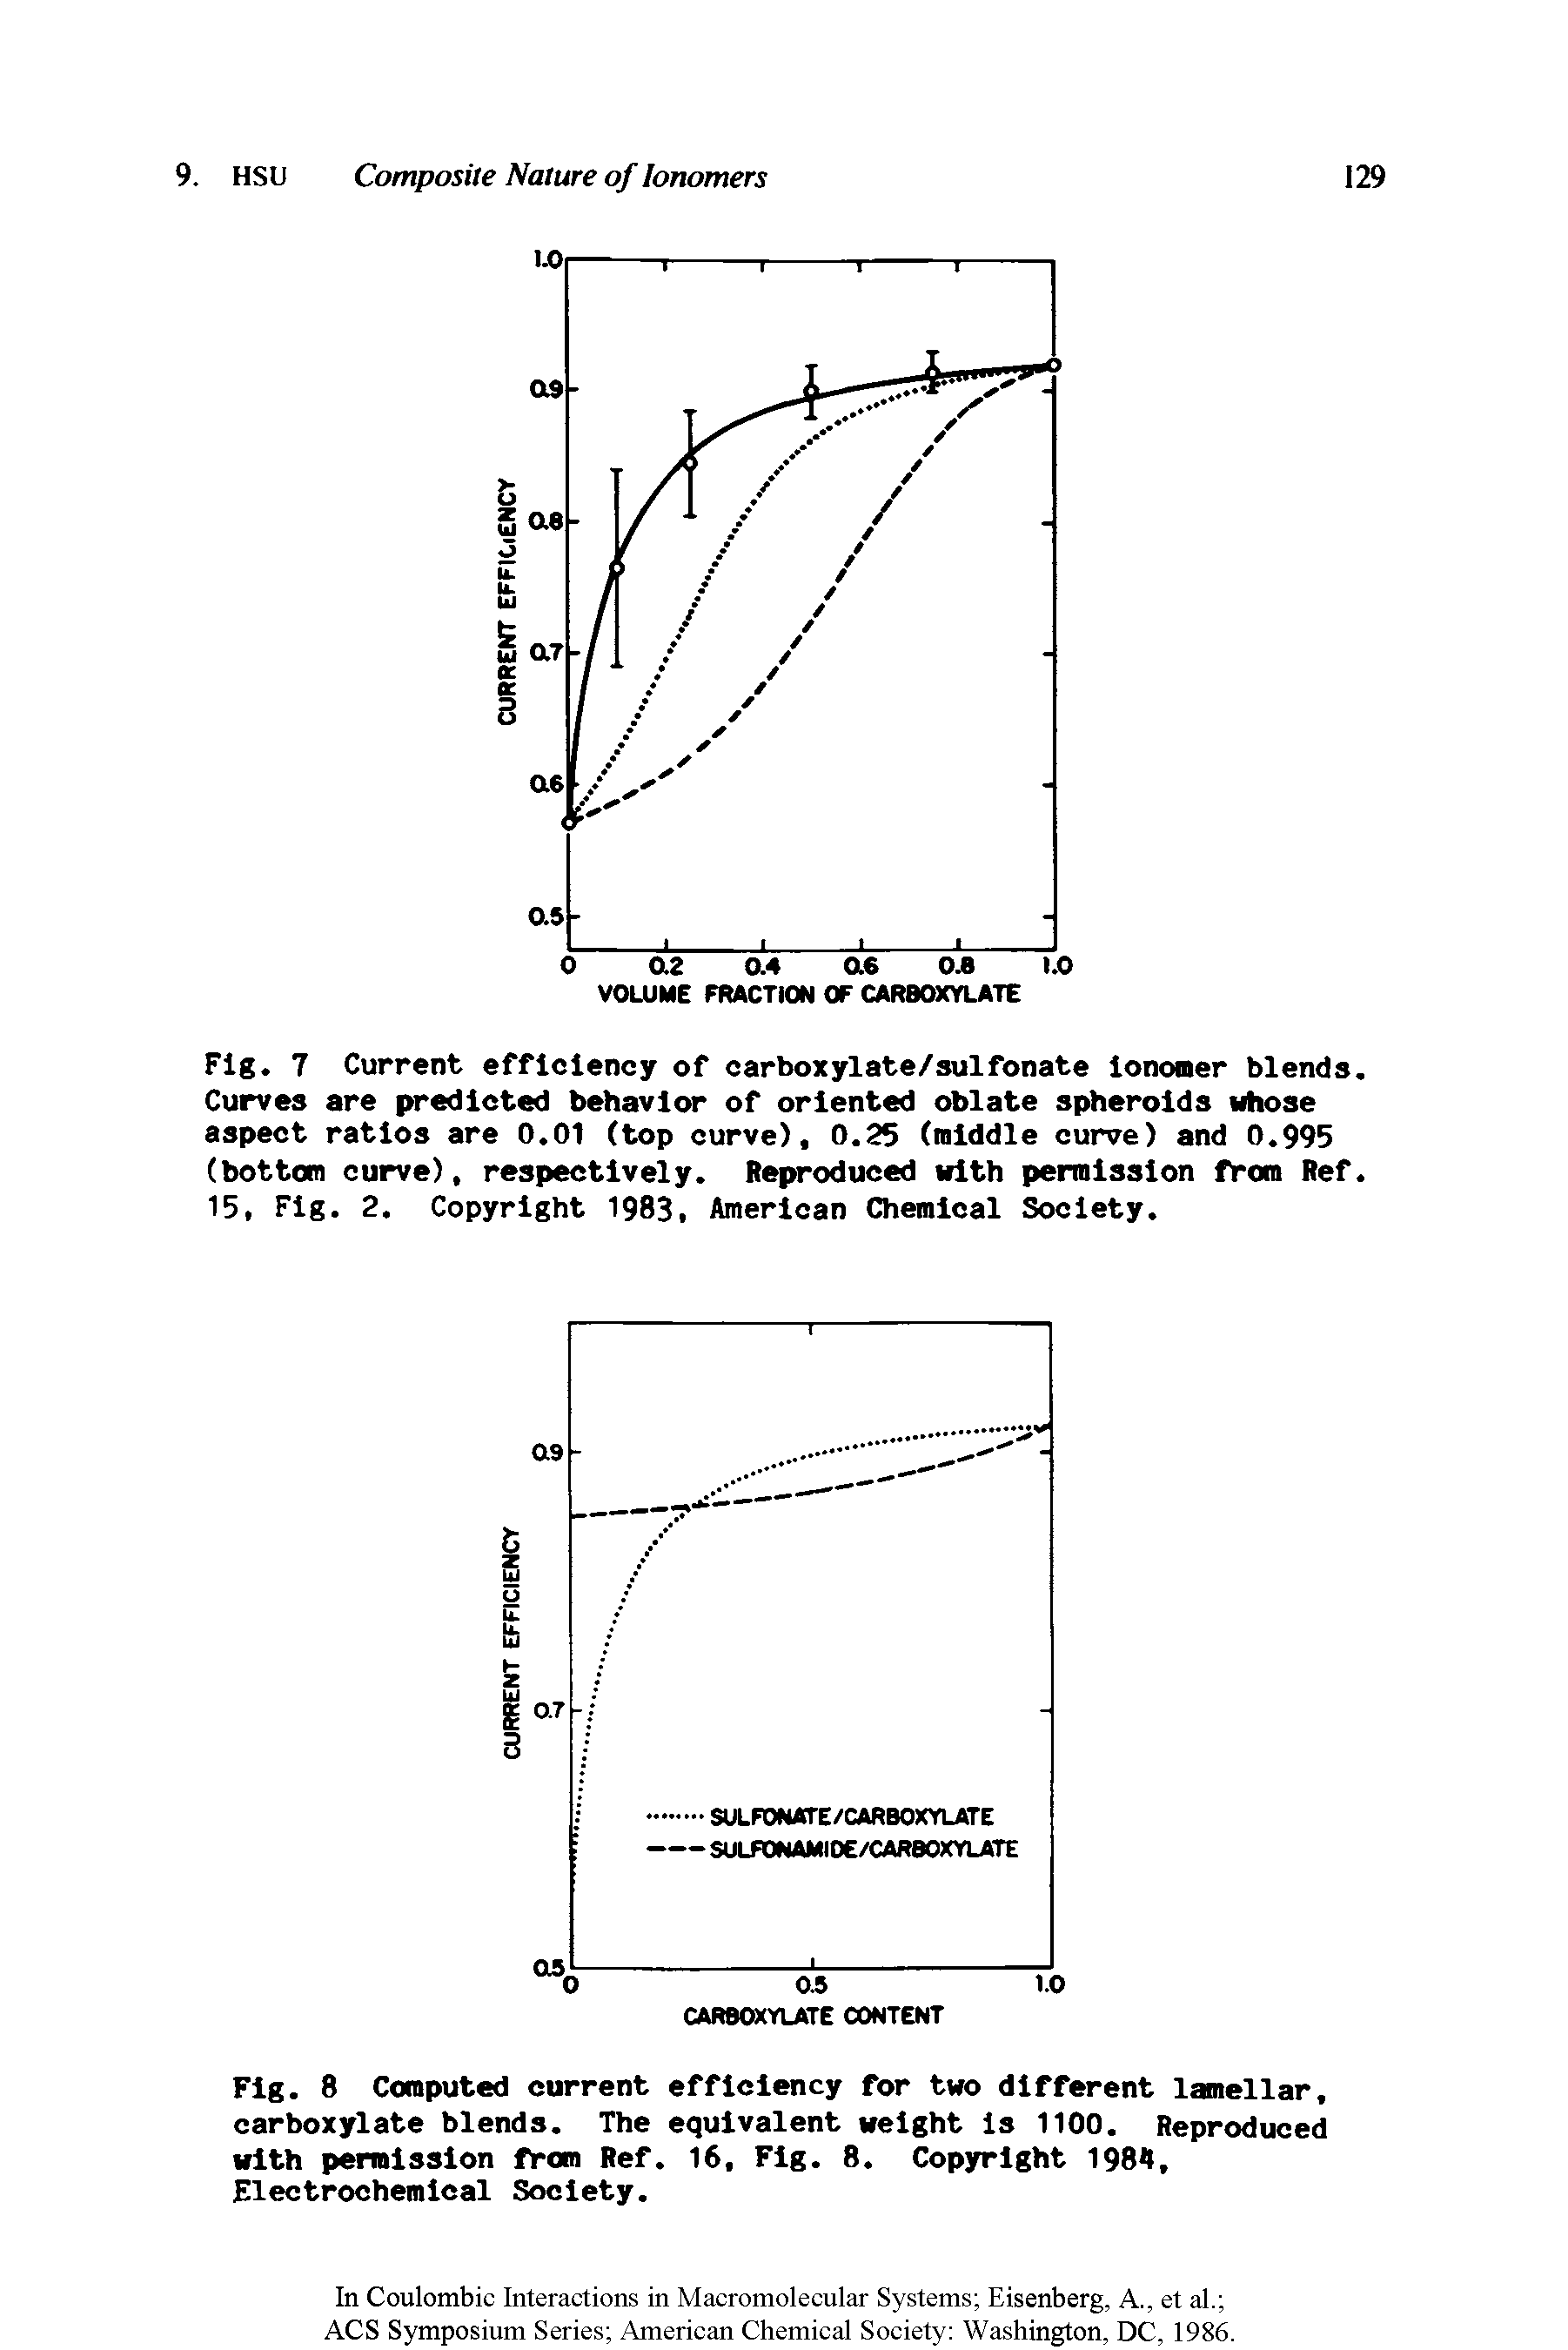 Fig. 8 Computed current efficiency for two different lamellar, carboxylate blends. The equivalent weight is 1100. Reproduced with permission from Ref. 16, Fig. 8. Copyright 1984, Electrochemical Society.